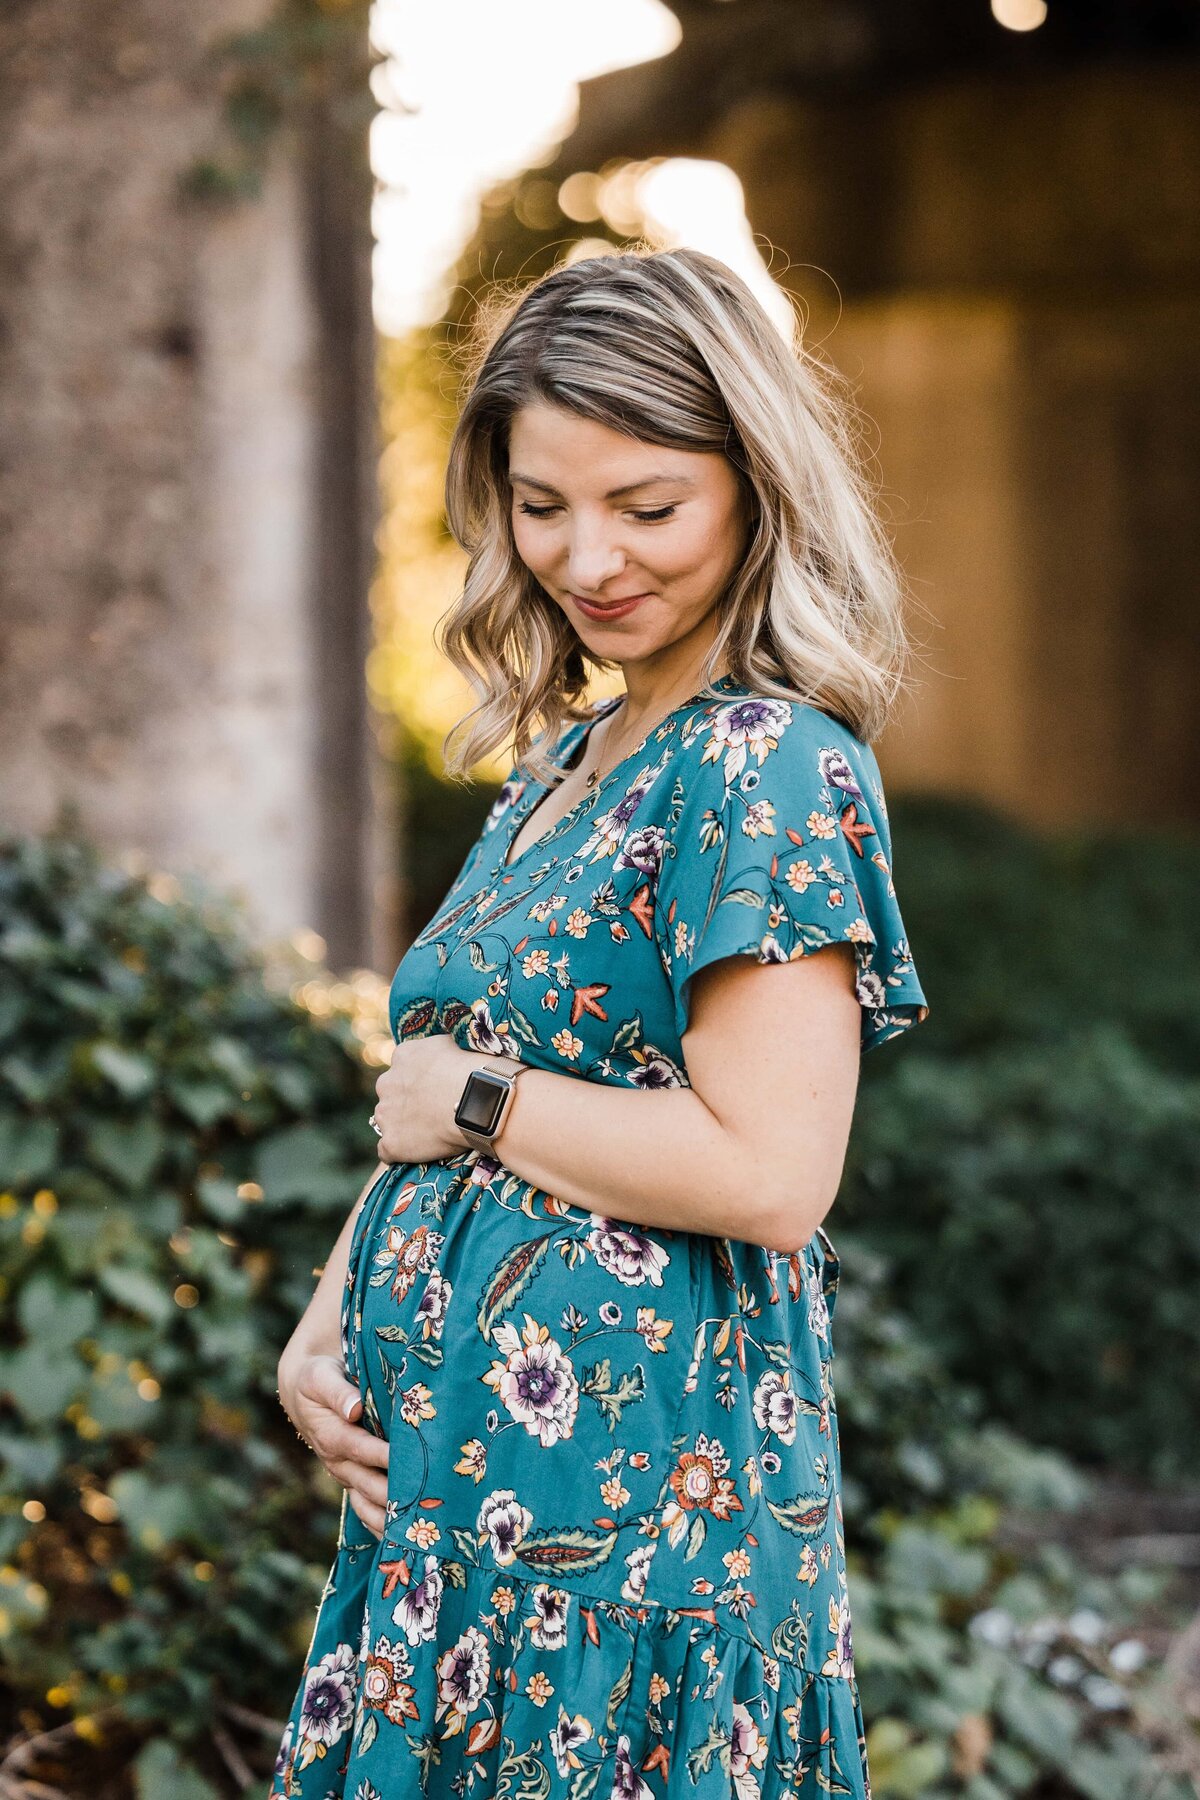 Pregnant woman smiling and touching her belly outdoors during her maternity photography session.